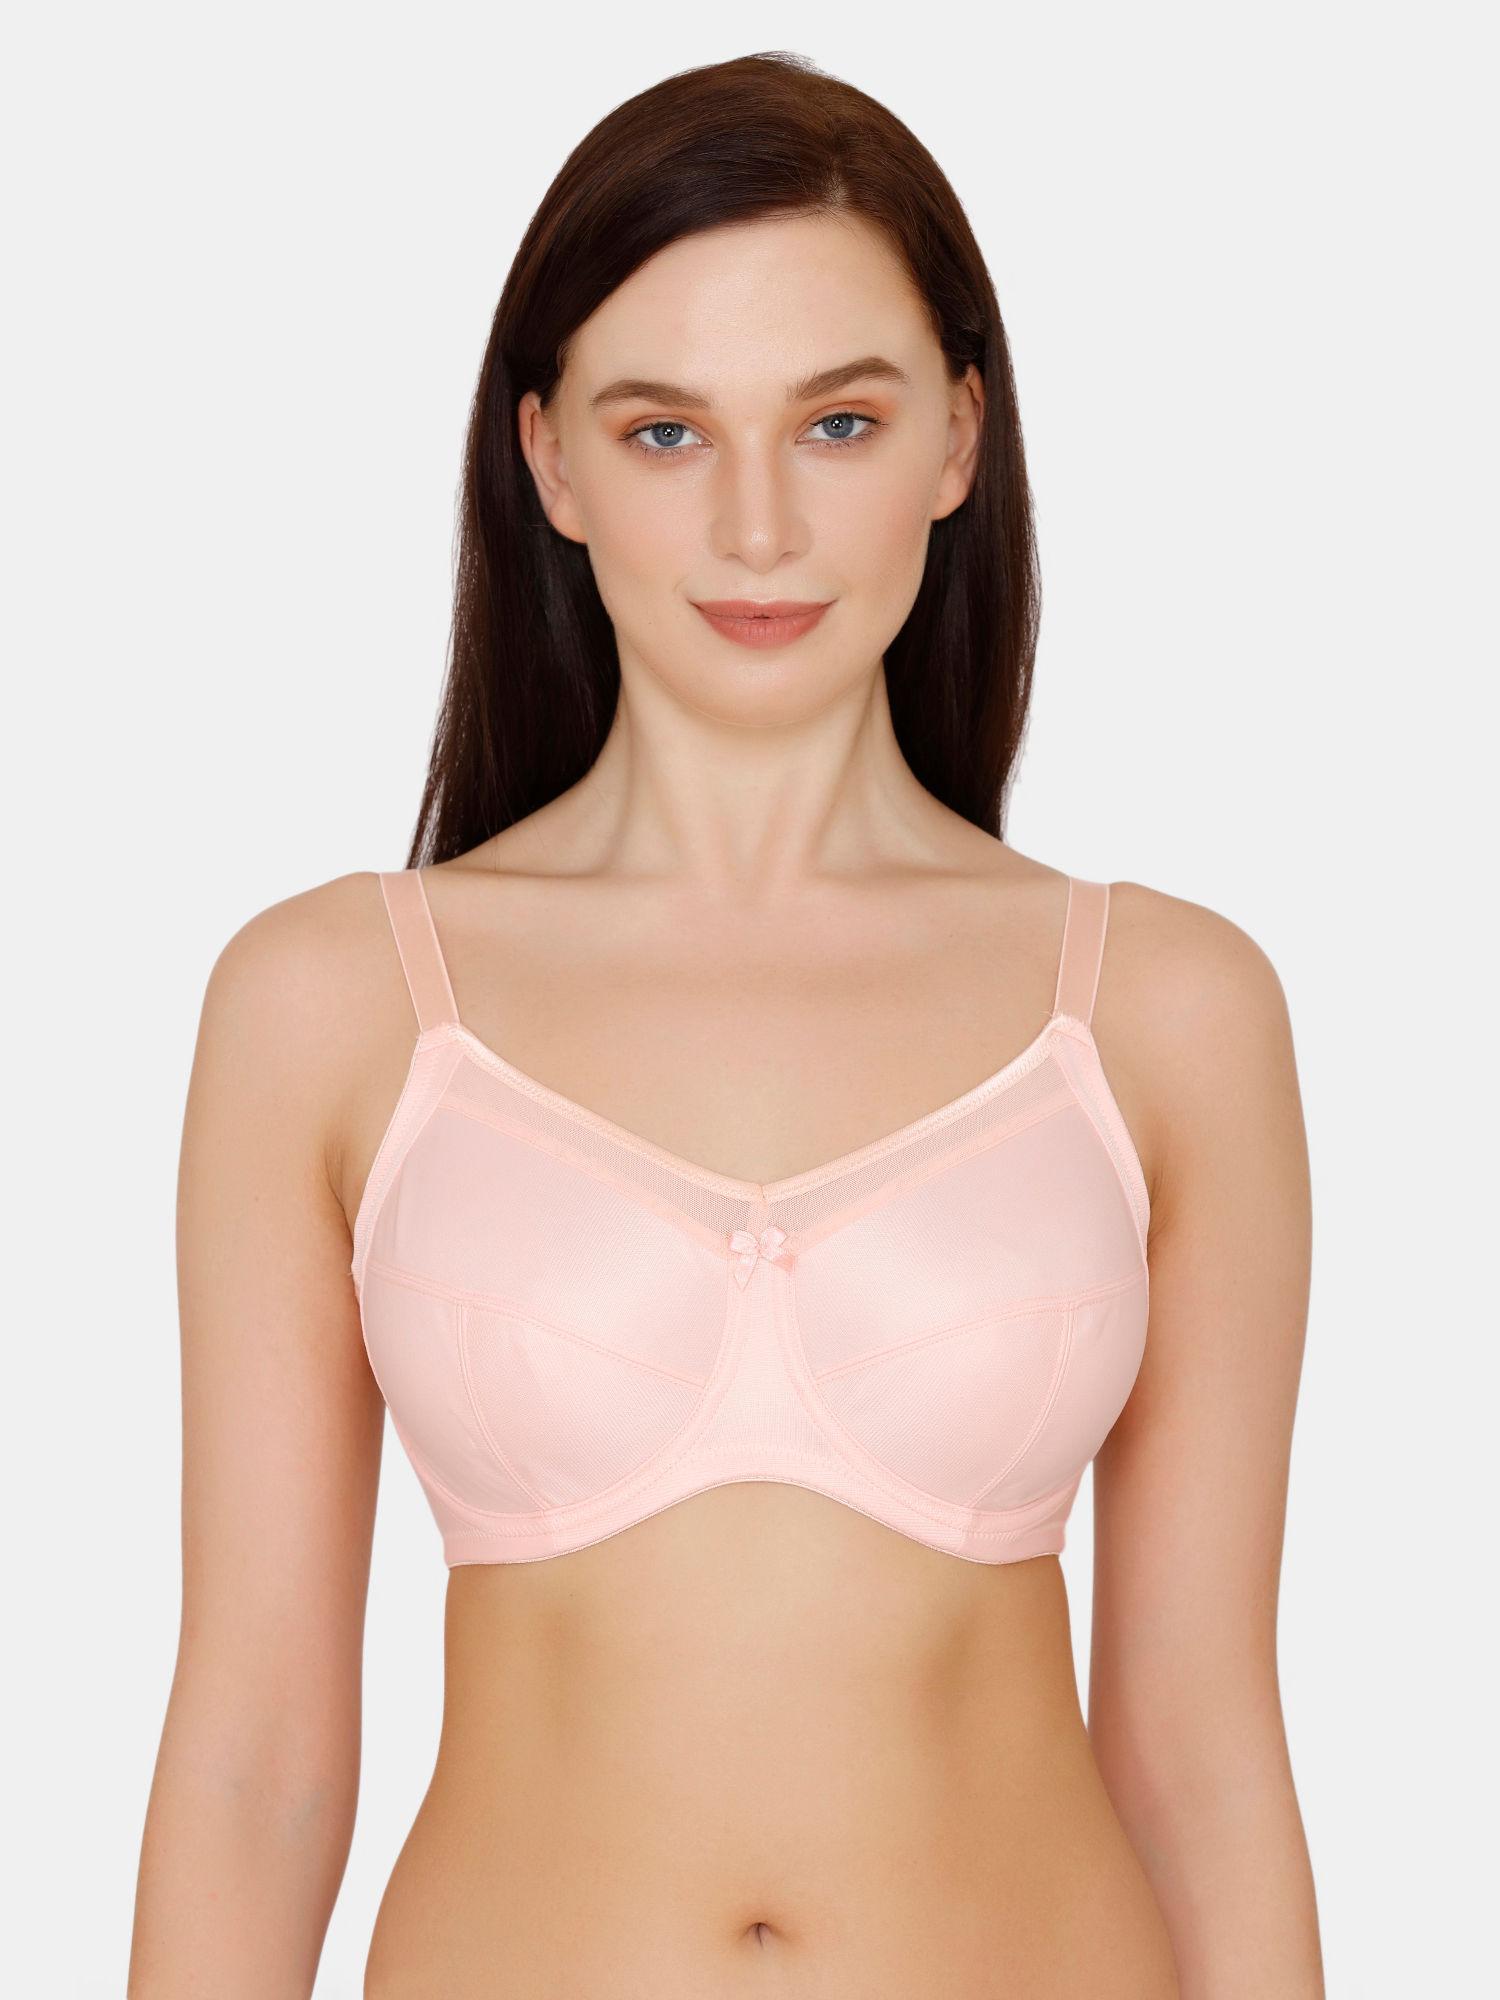 double layered wired full coverage supper support bra - impatience pink